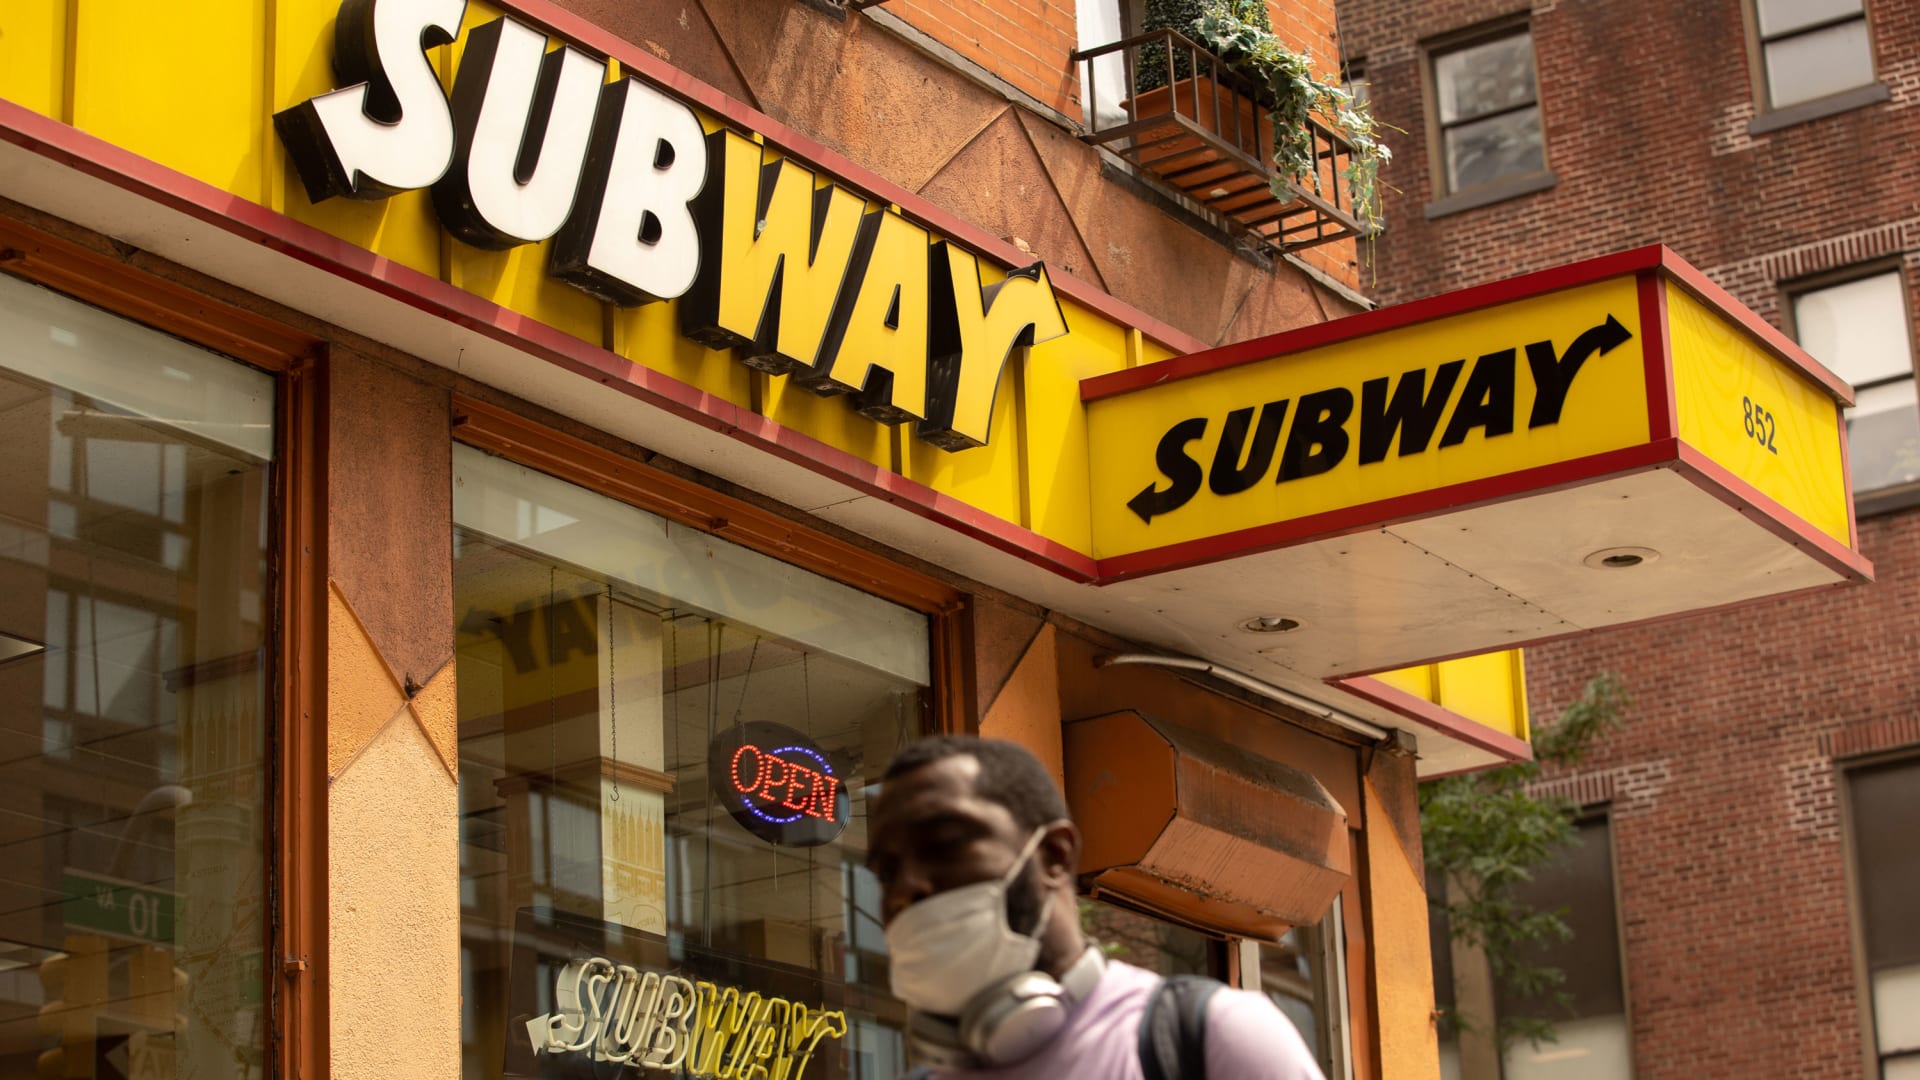 A Subway restaurant location in New York City.